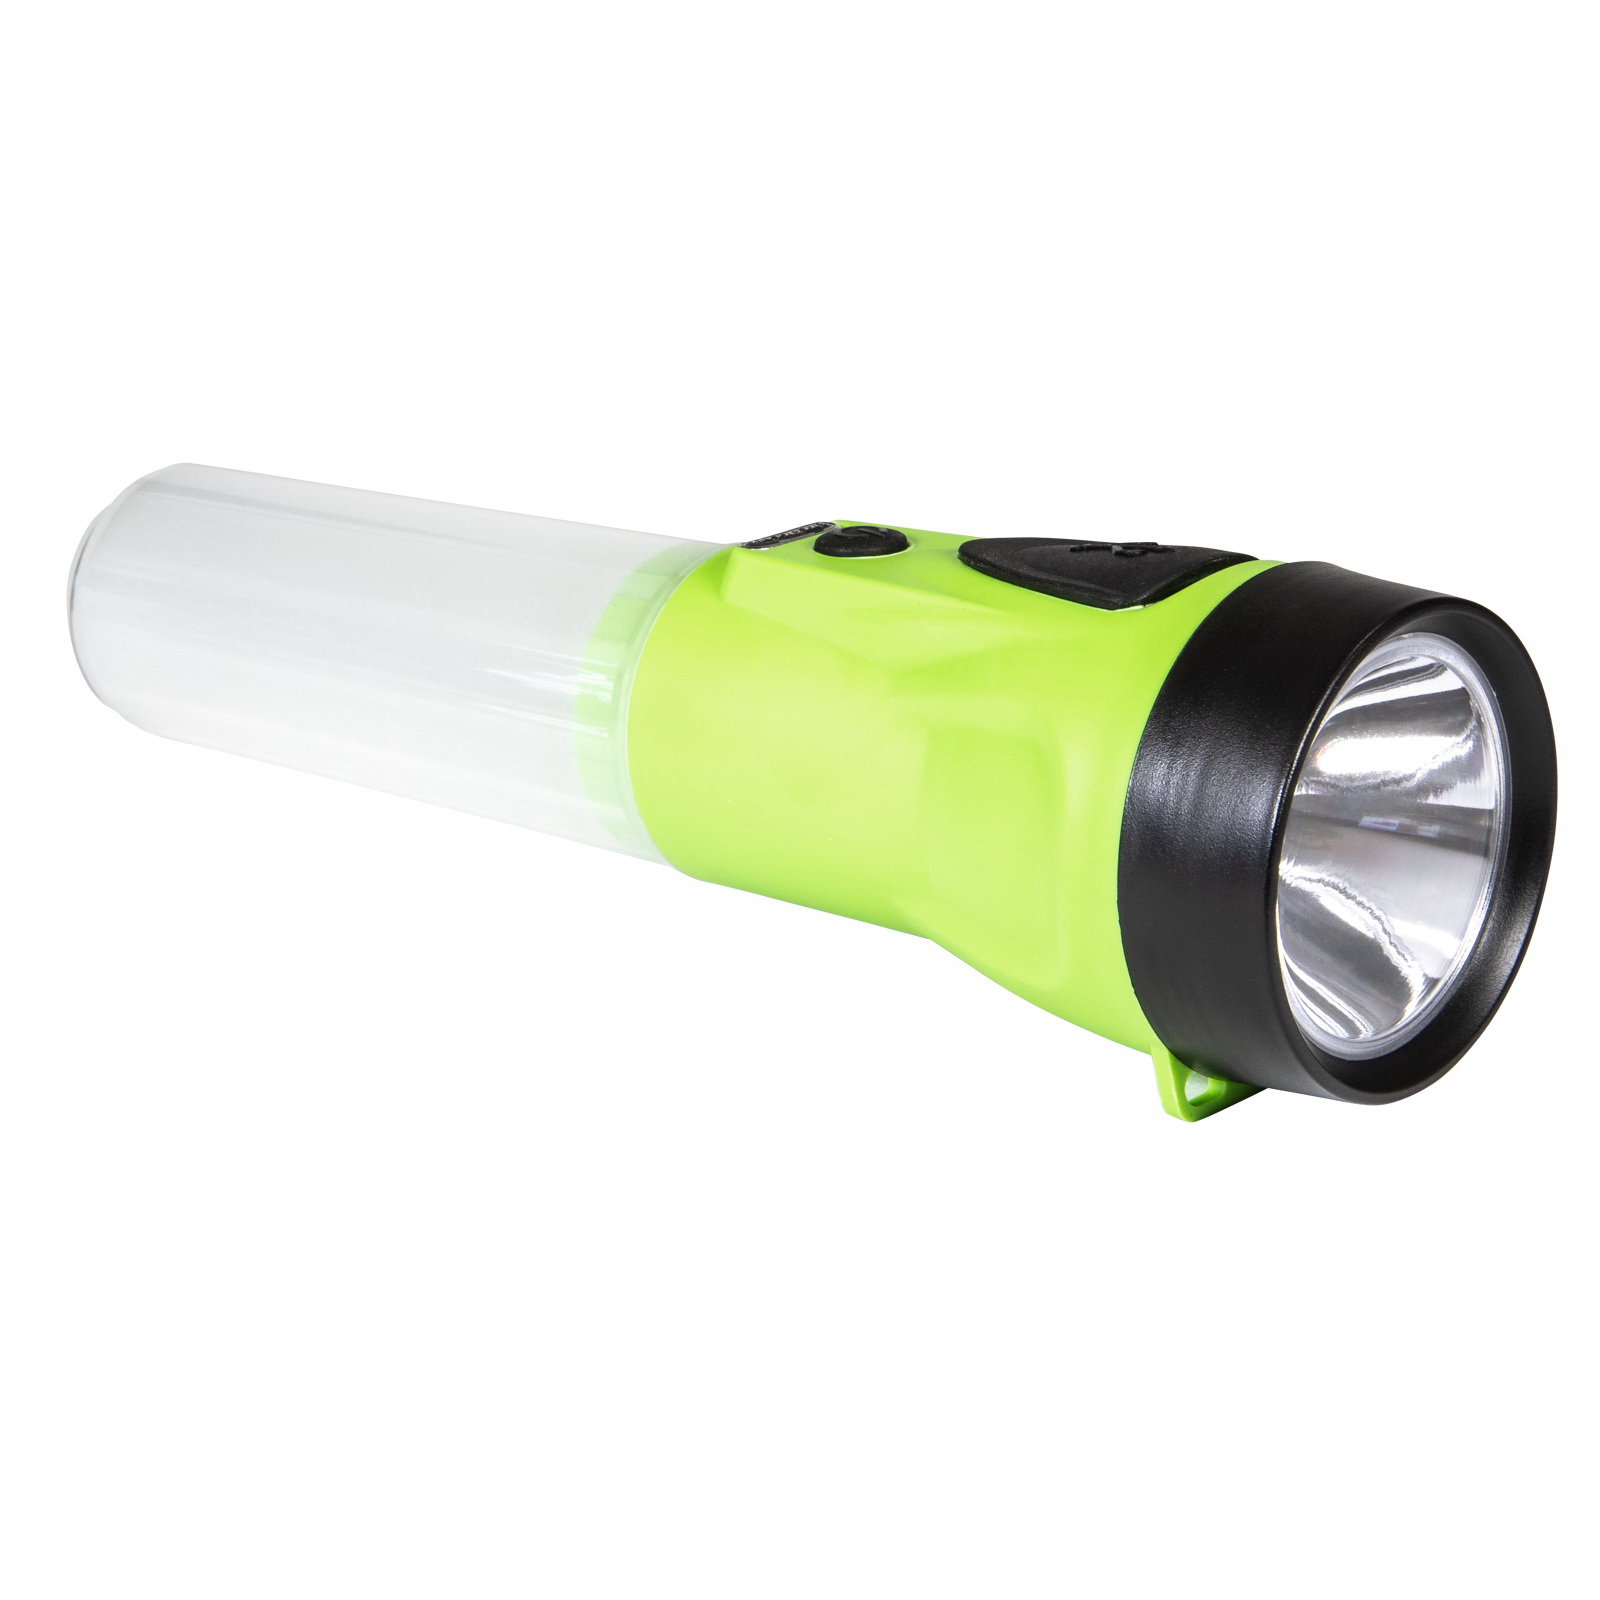 Adventure Series 41-3747 Rechargeable Power Light, 1500 mAh, Lithium-Ion Battery, LED Lamp, 820 ft Beam Distance